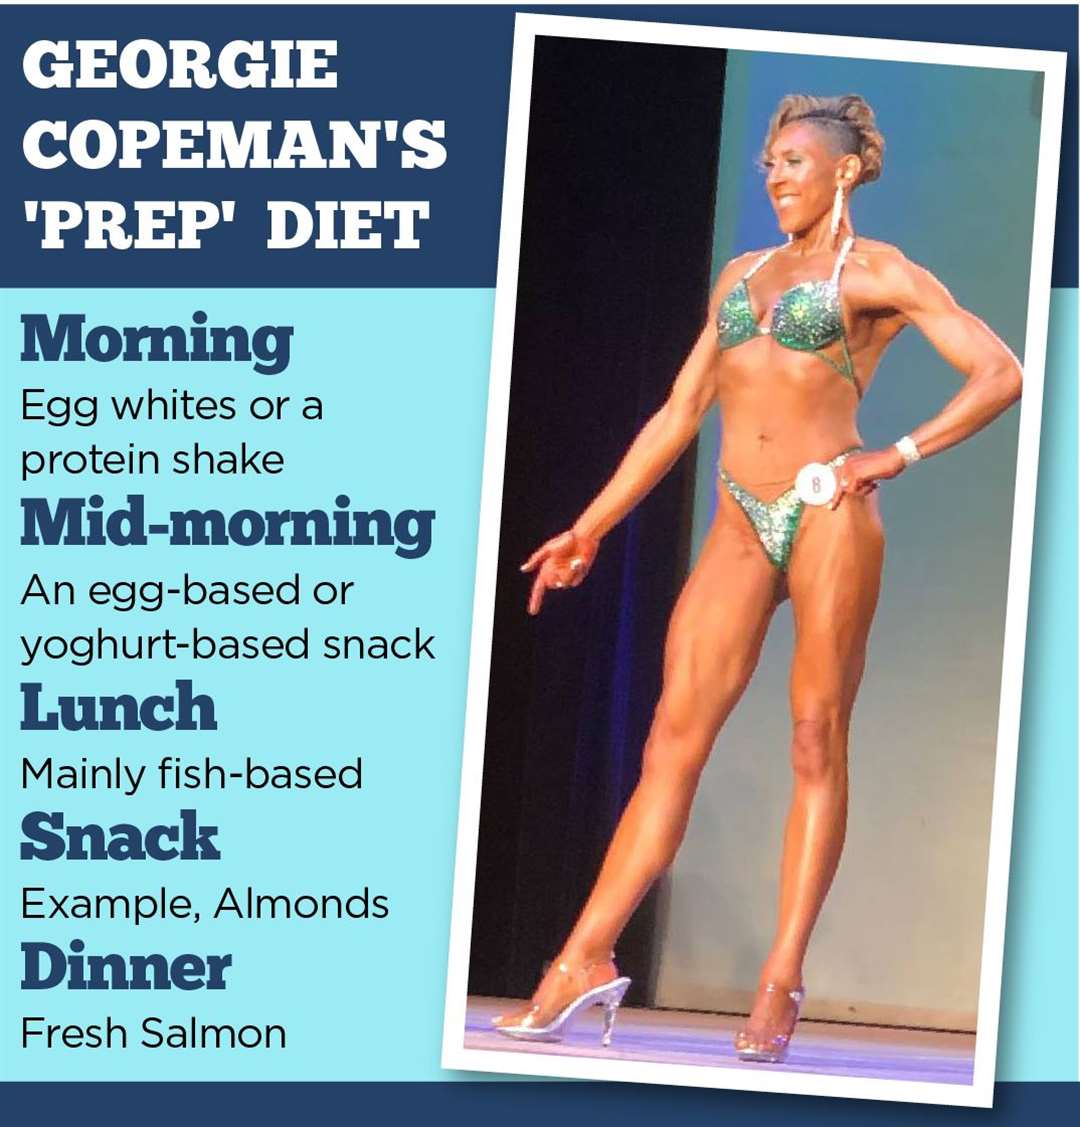 A normal day in Ms Copeman's diet during 'prep' week ahead of a competition